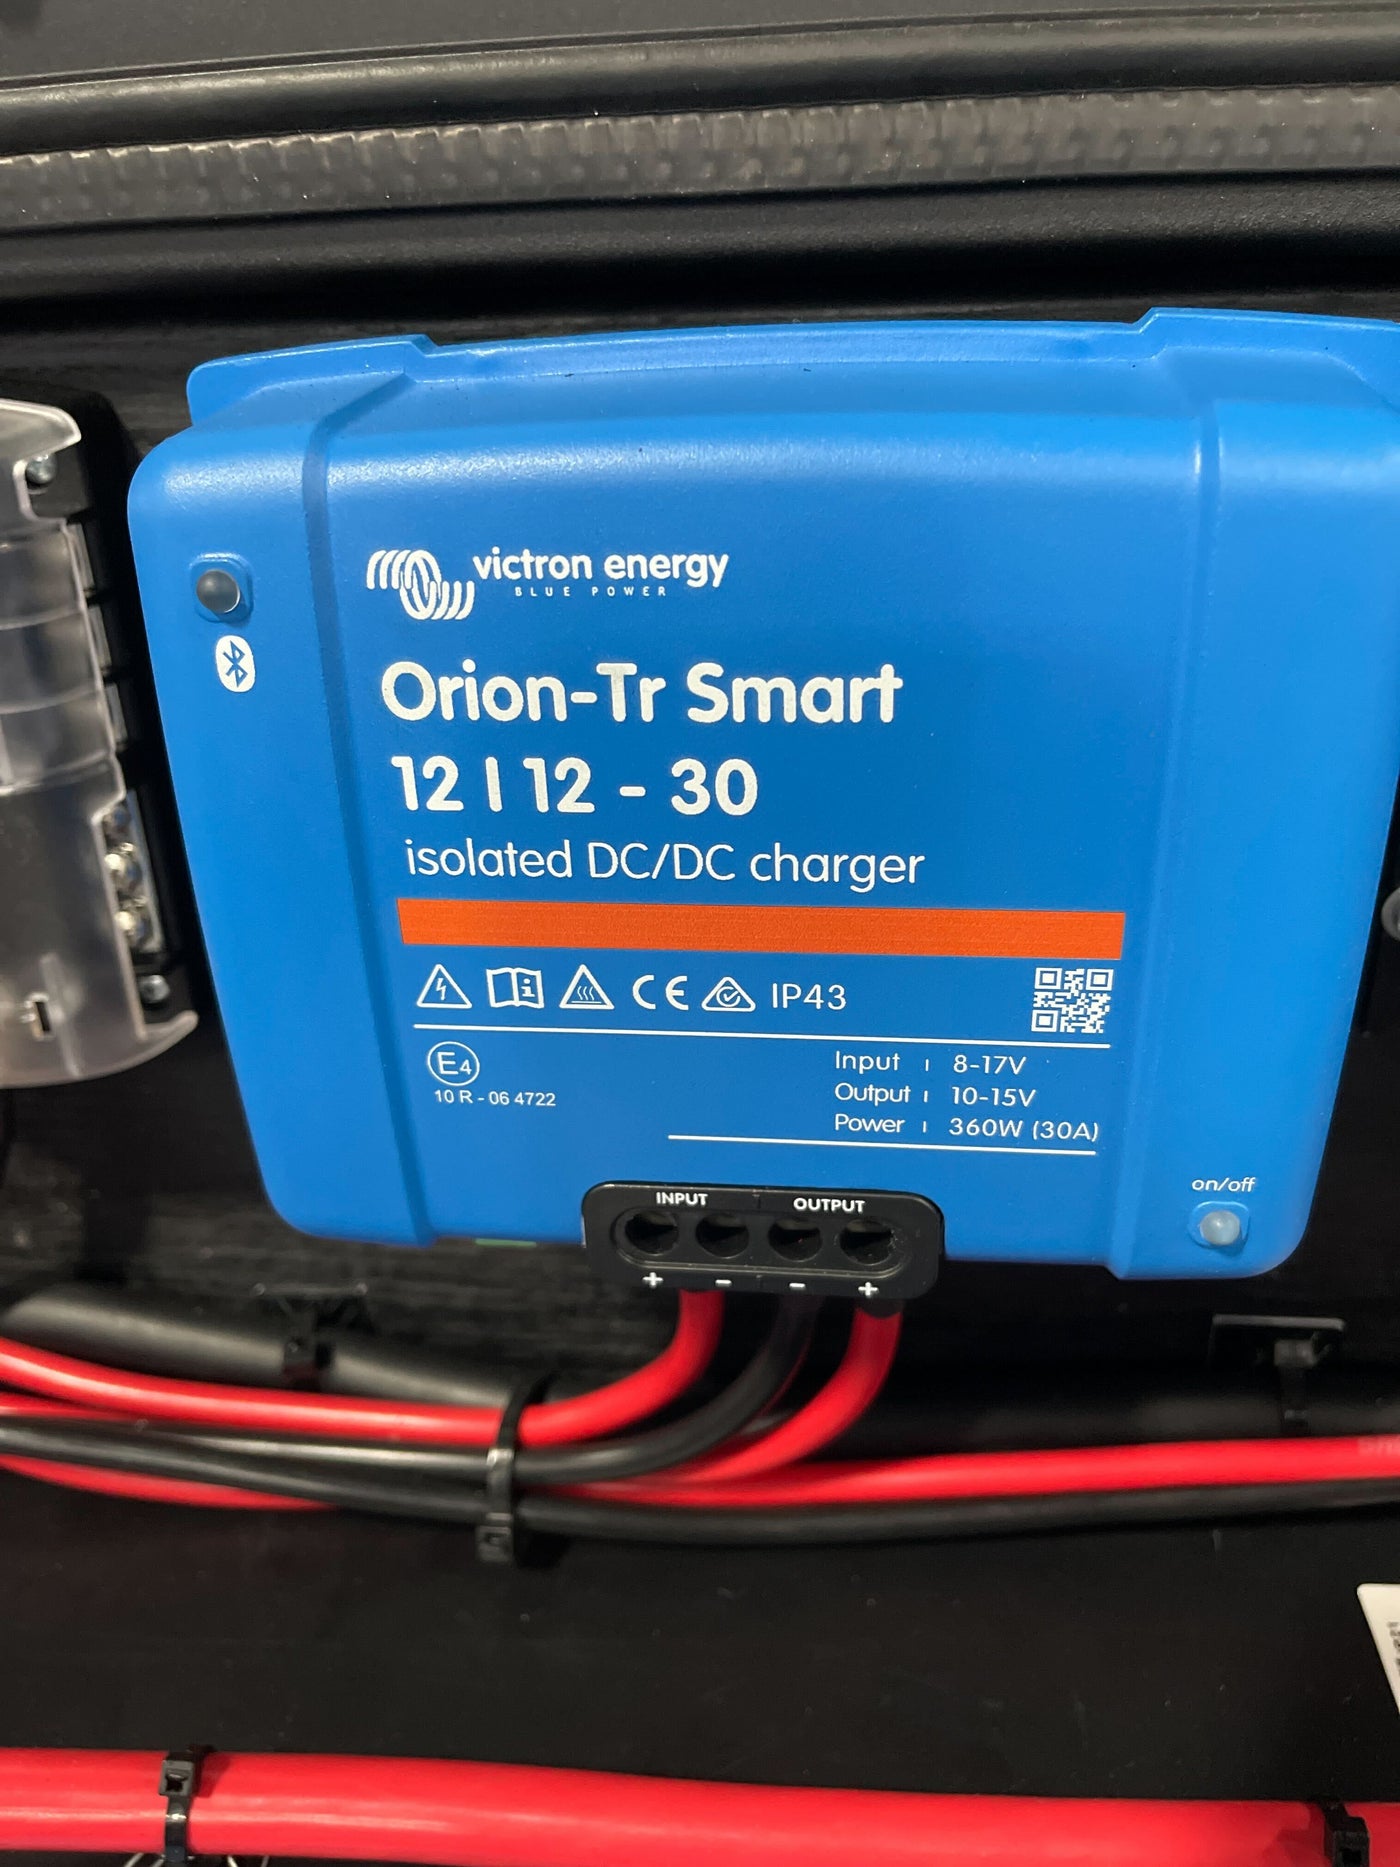 Orion-Tr Smart DC-DC Charger Isolated - Next Jump Outfitters